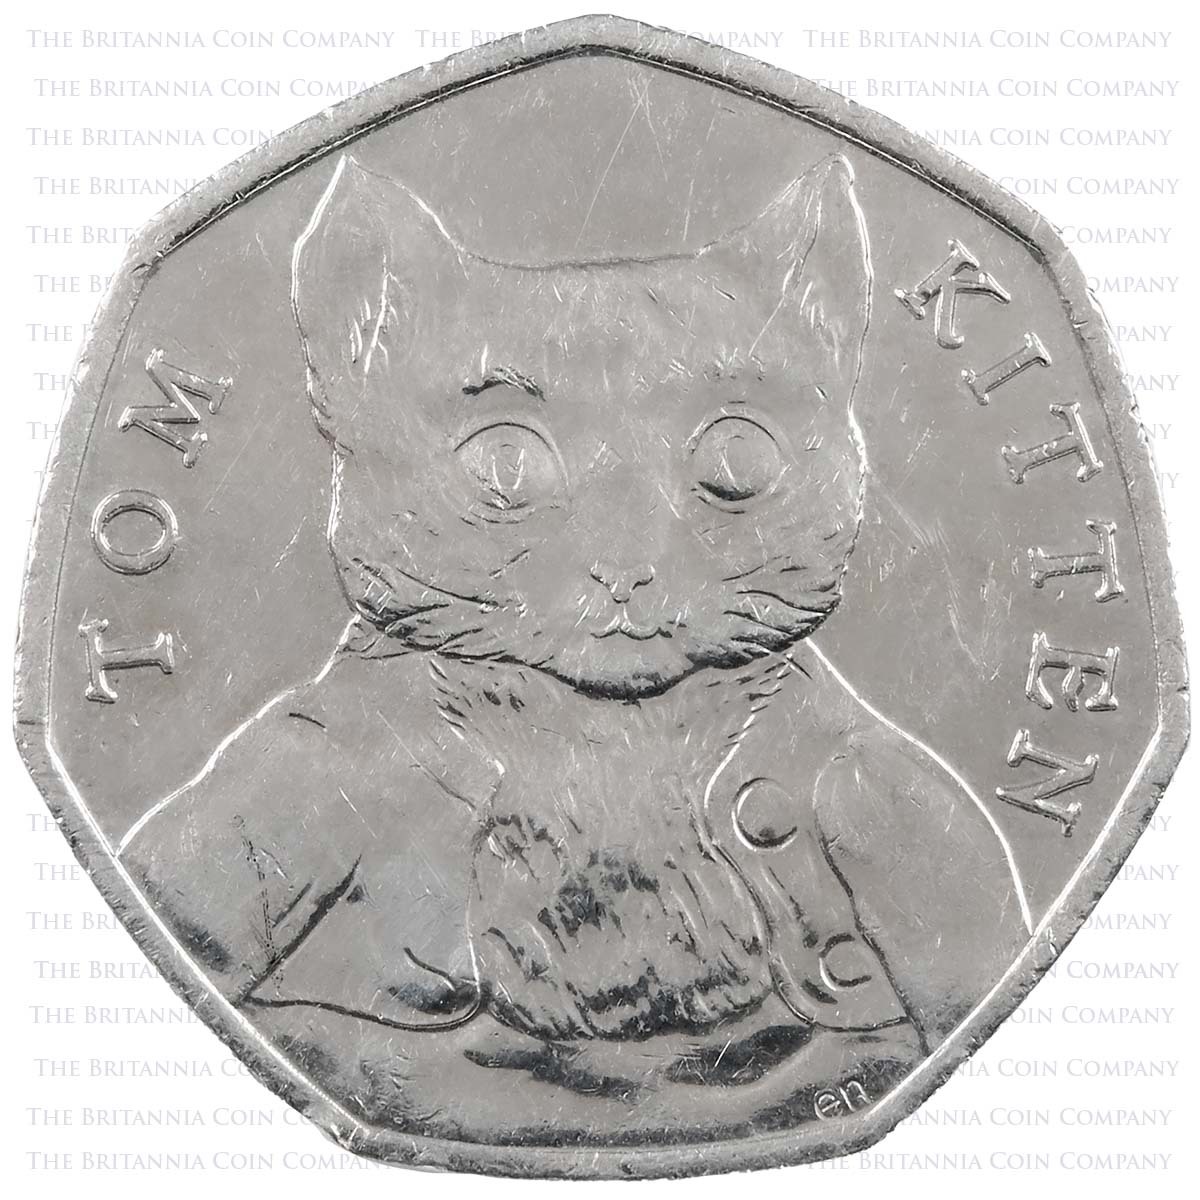 2017 Beatrix Potter Tom Kitten Circulated Fifty Pence Coin Reverse